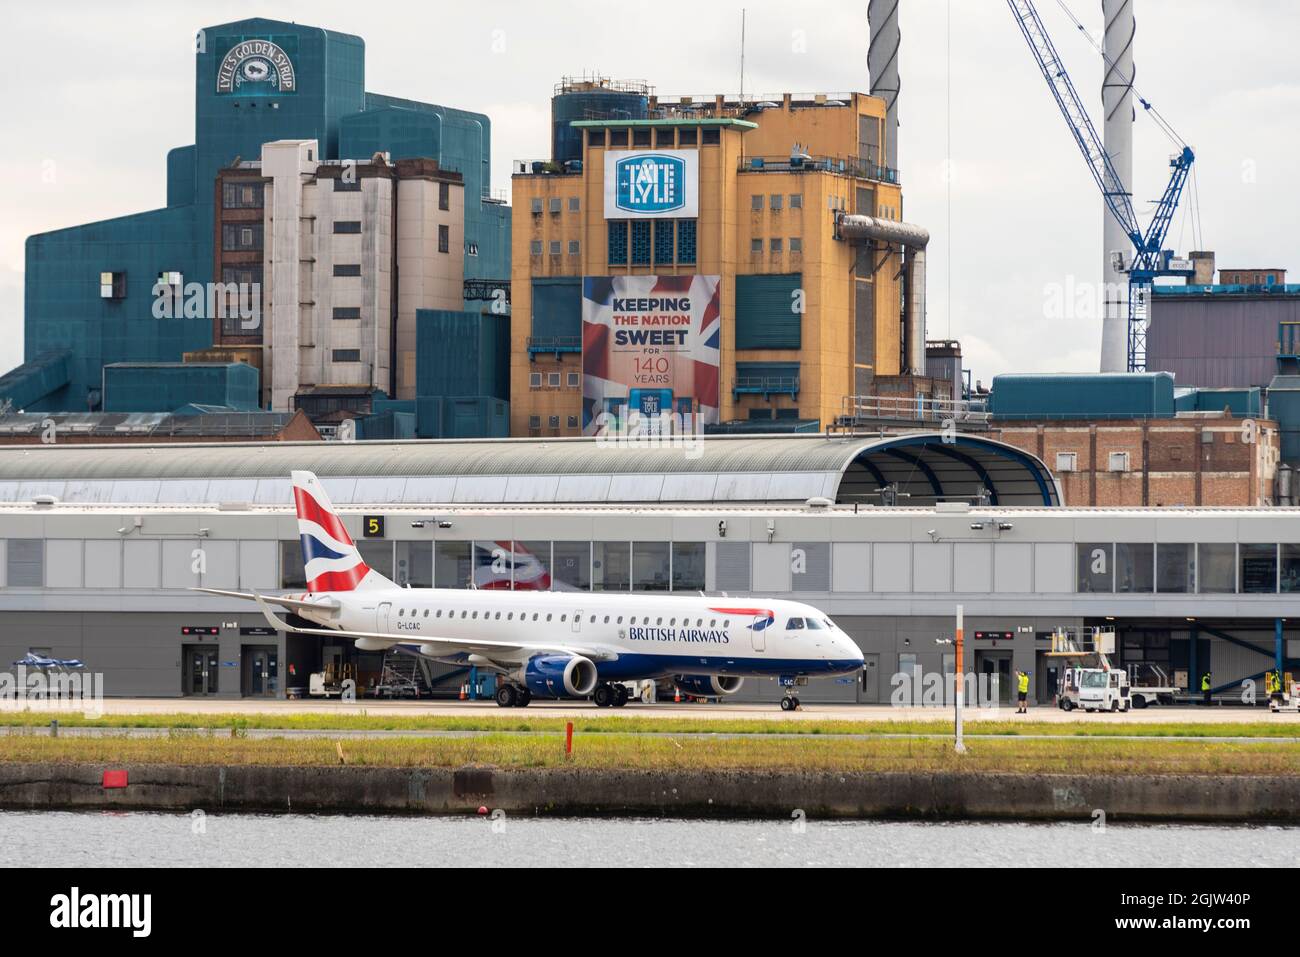 London City Airport, with the iconic Tate & Lyle sugar refinery factory behind. British Airways Cityflyer Embraer ERJ 190 jet airliner plane on stand Stock Photo